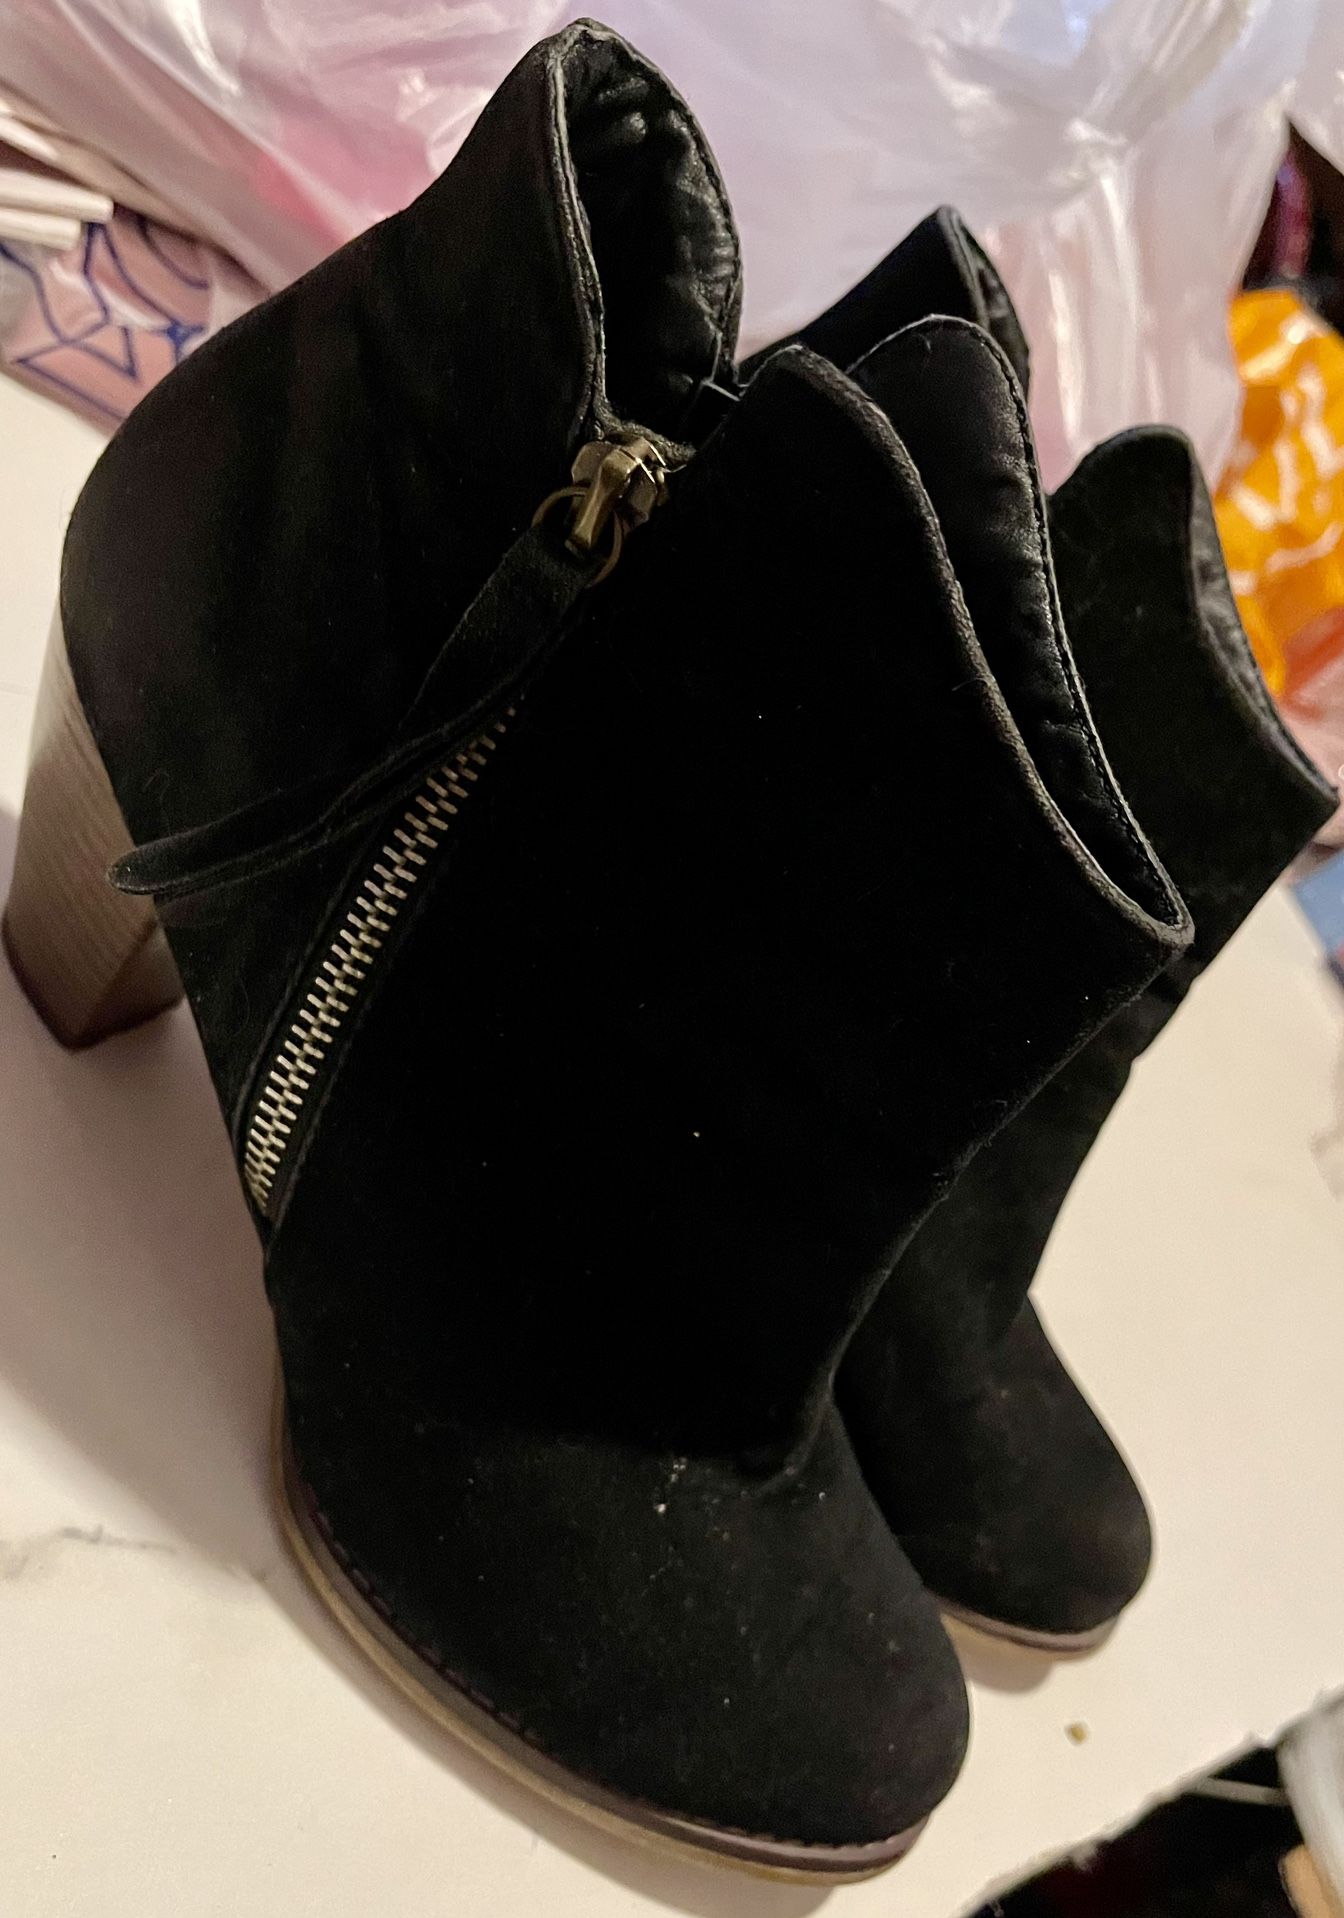 BLACK BOOTS SIZE:9 (MUST PICK UP) S.E. SIDE